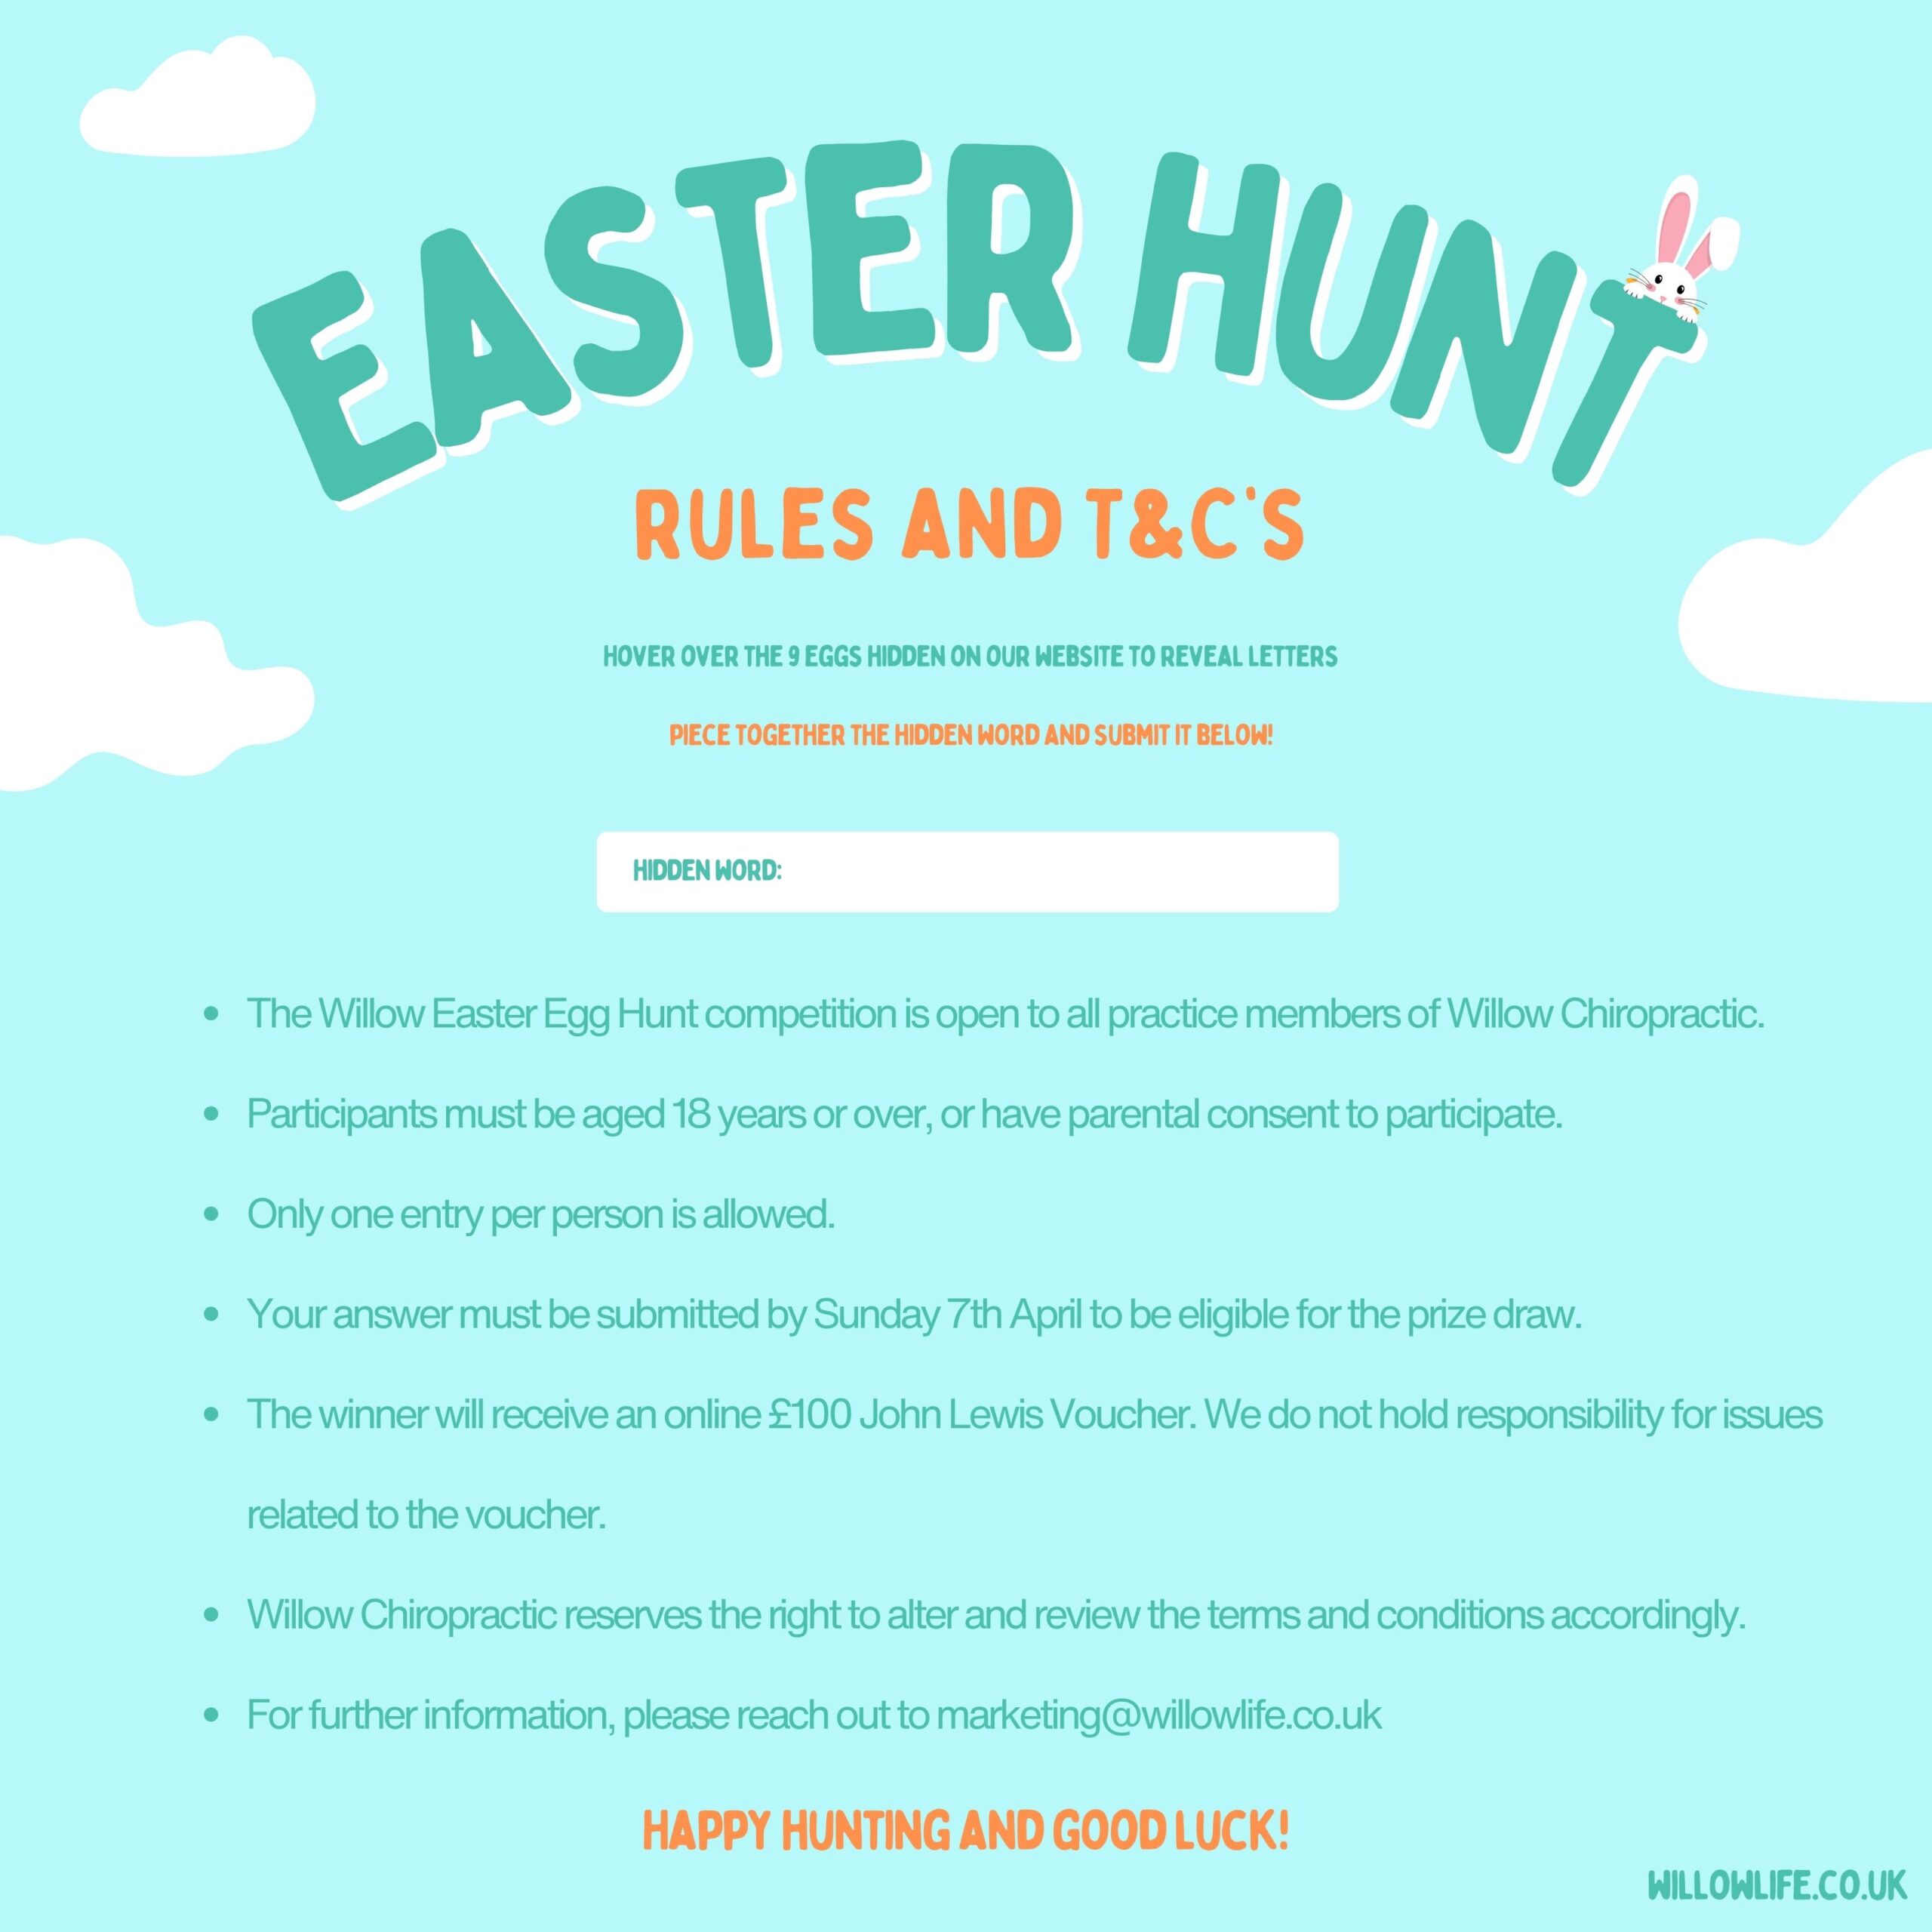 THEEE FINAL Easter Egg Hunt Collector